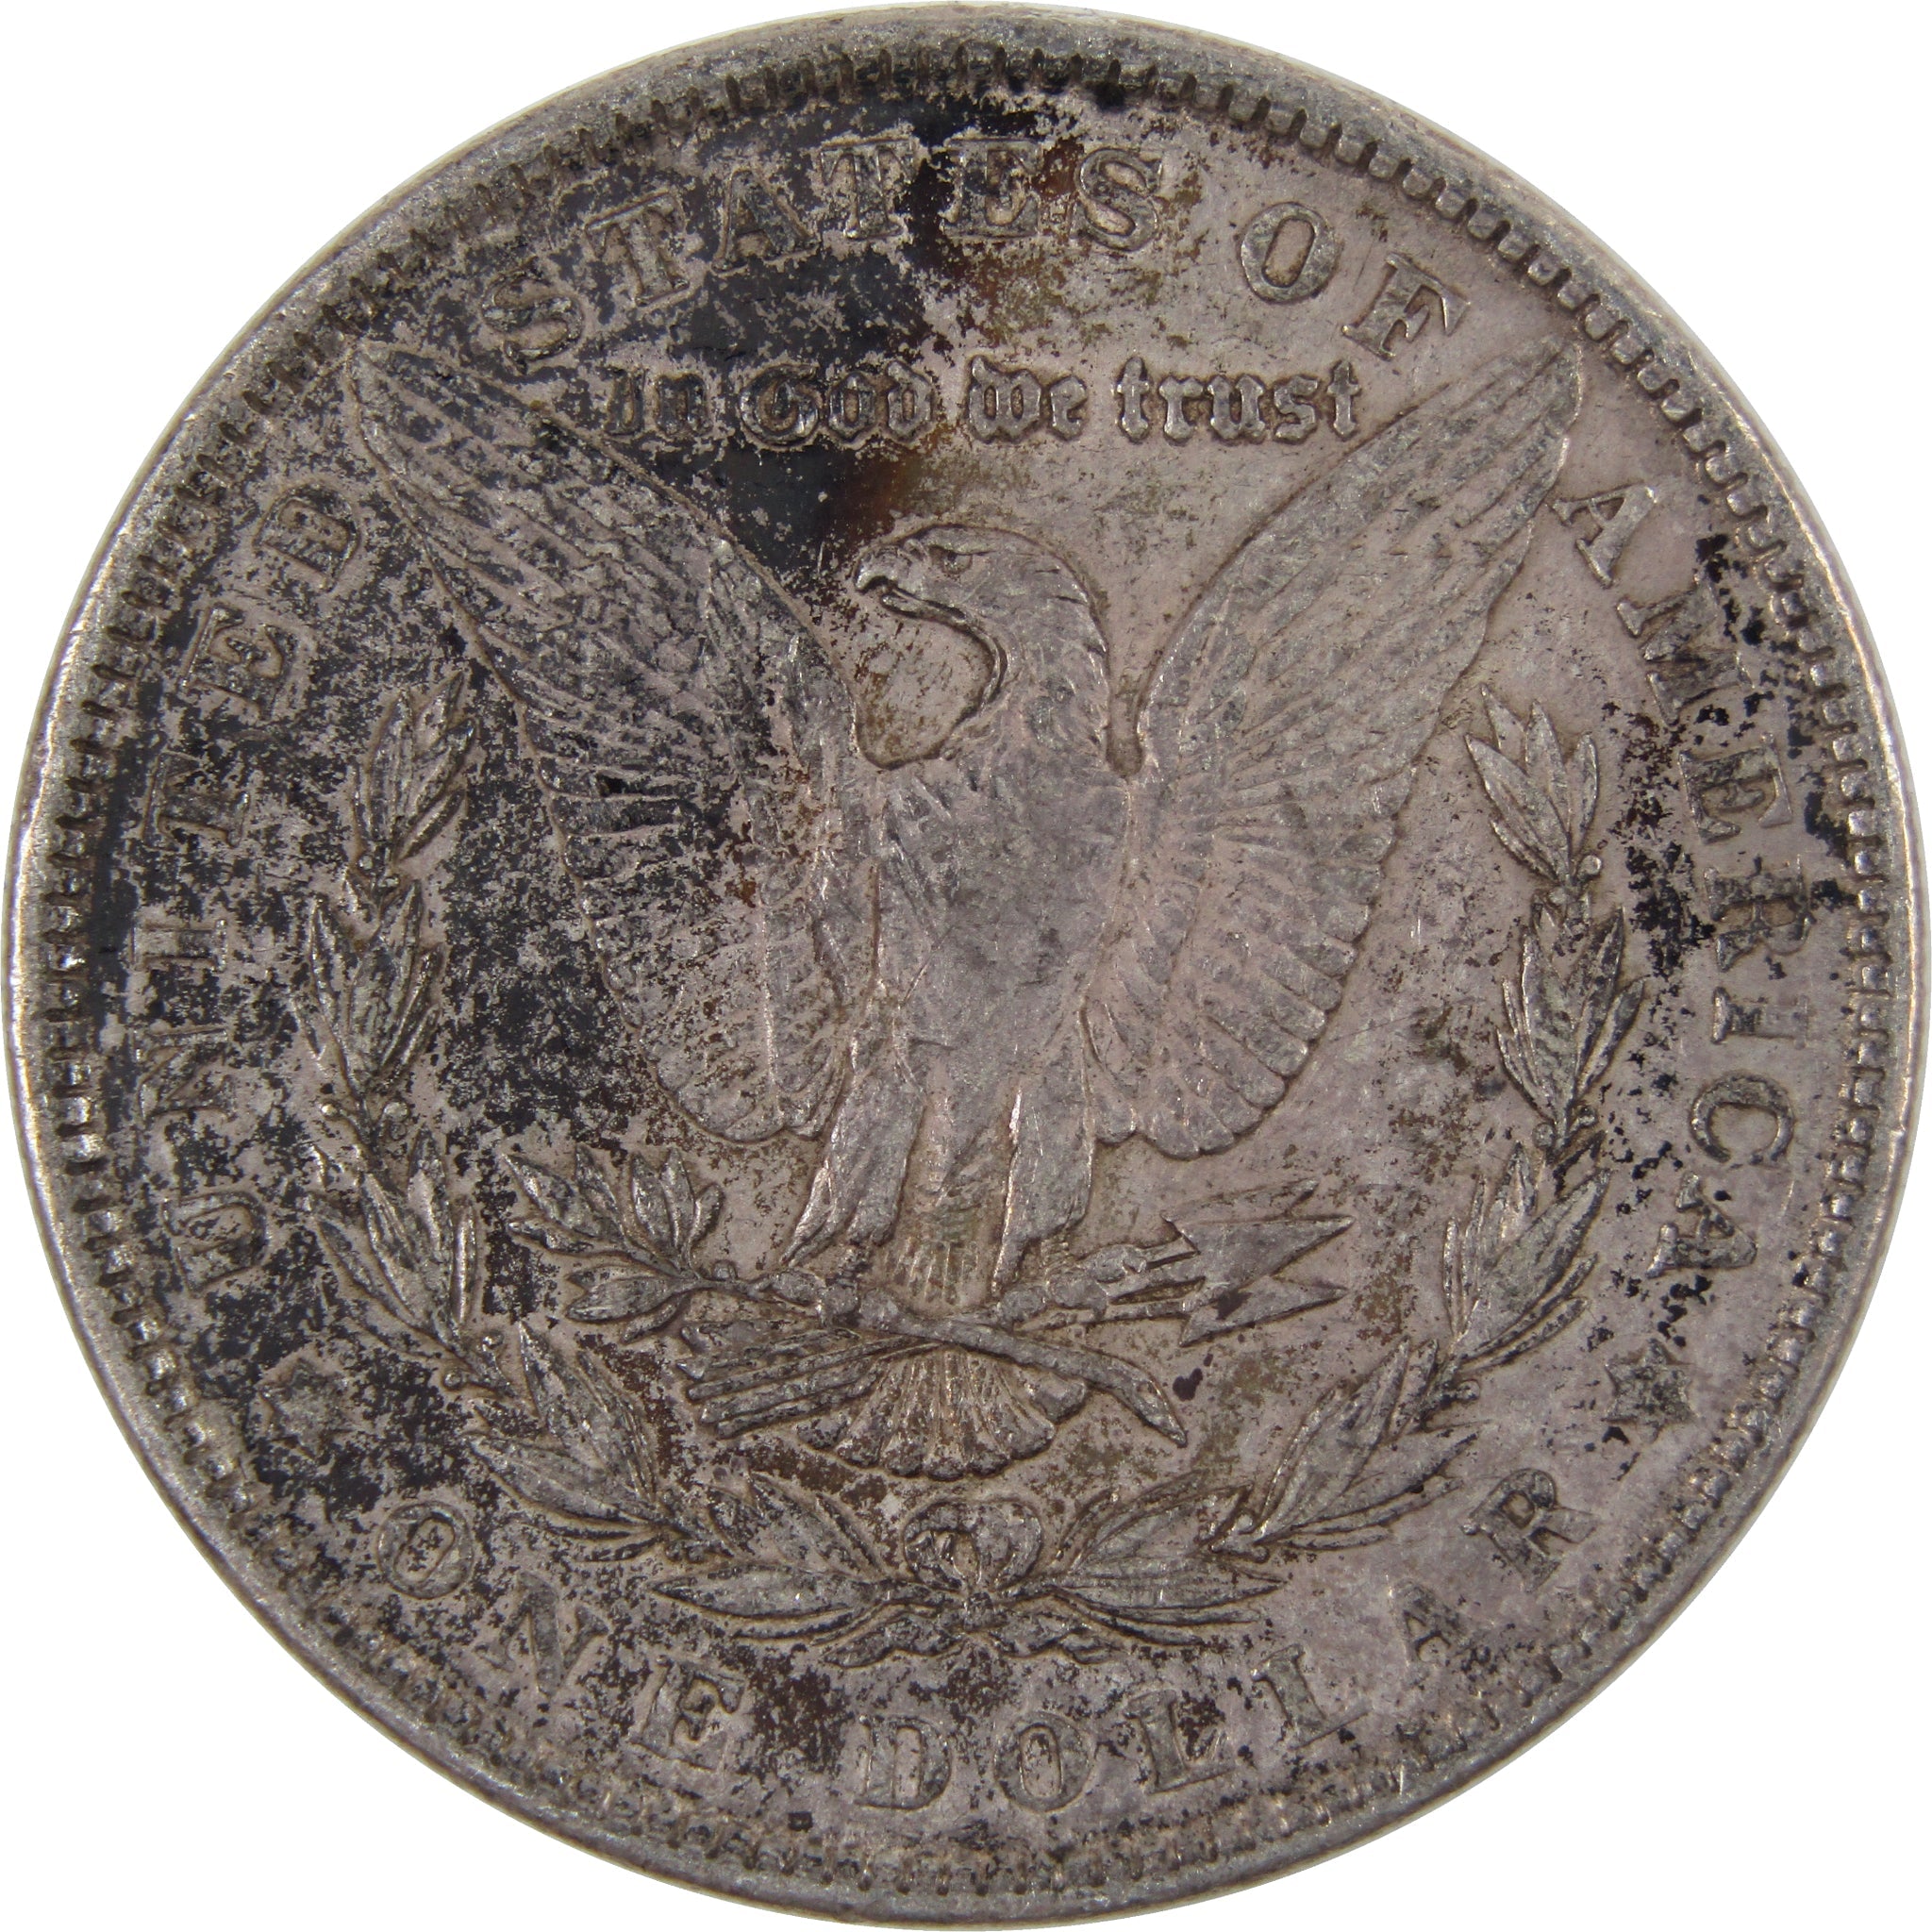 1902 Morgan Dollar XF EF Extremely Fine 90% Silver Coin SKU:I2421 - Morgan coin - Morgan silver dollar - Morgan silver dollar for sale - Profile Coins &amp; Collectibles